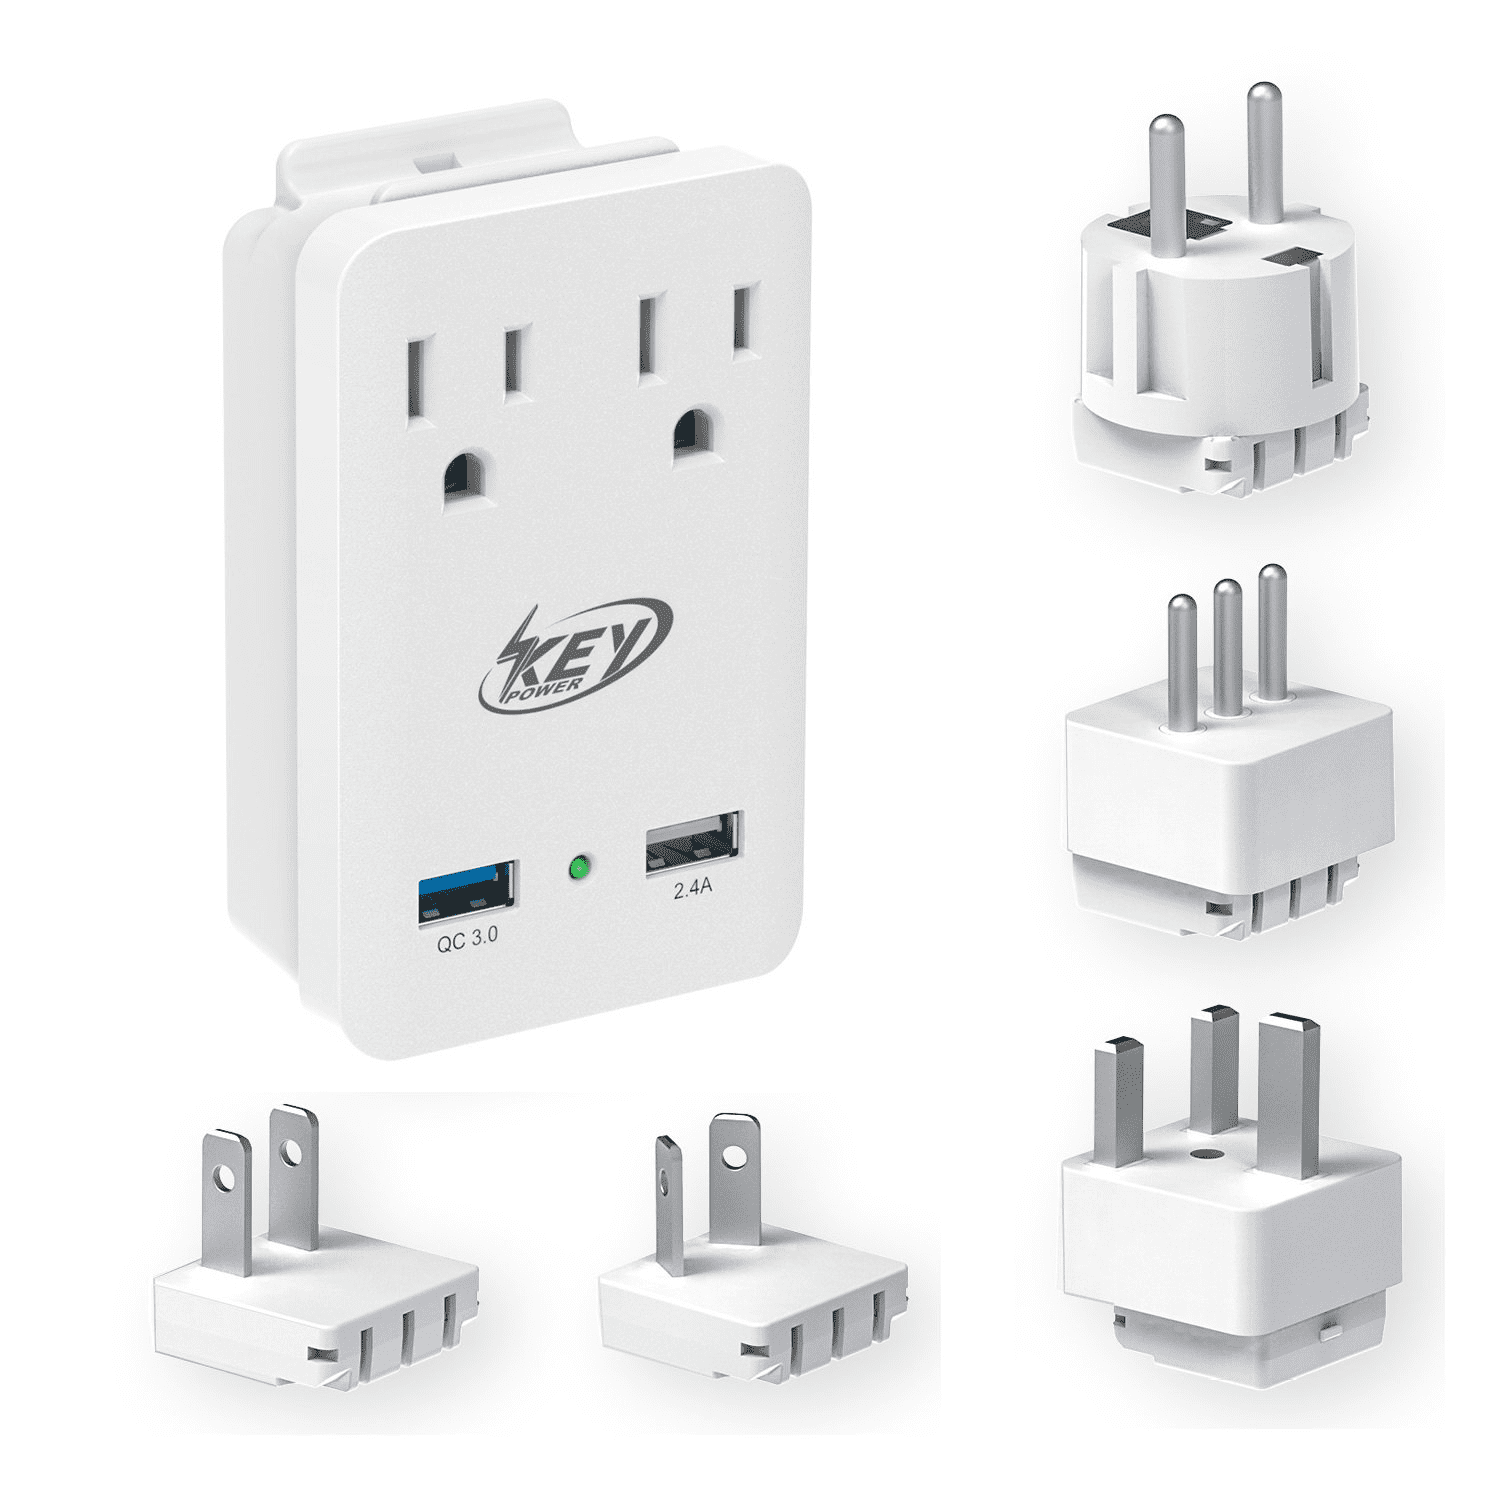 EU UK UK Plug Power Strip Surge Protector 3 Outlets and 4 Ports 3A USB Charging